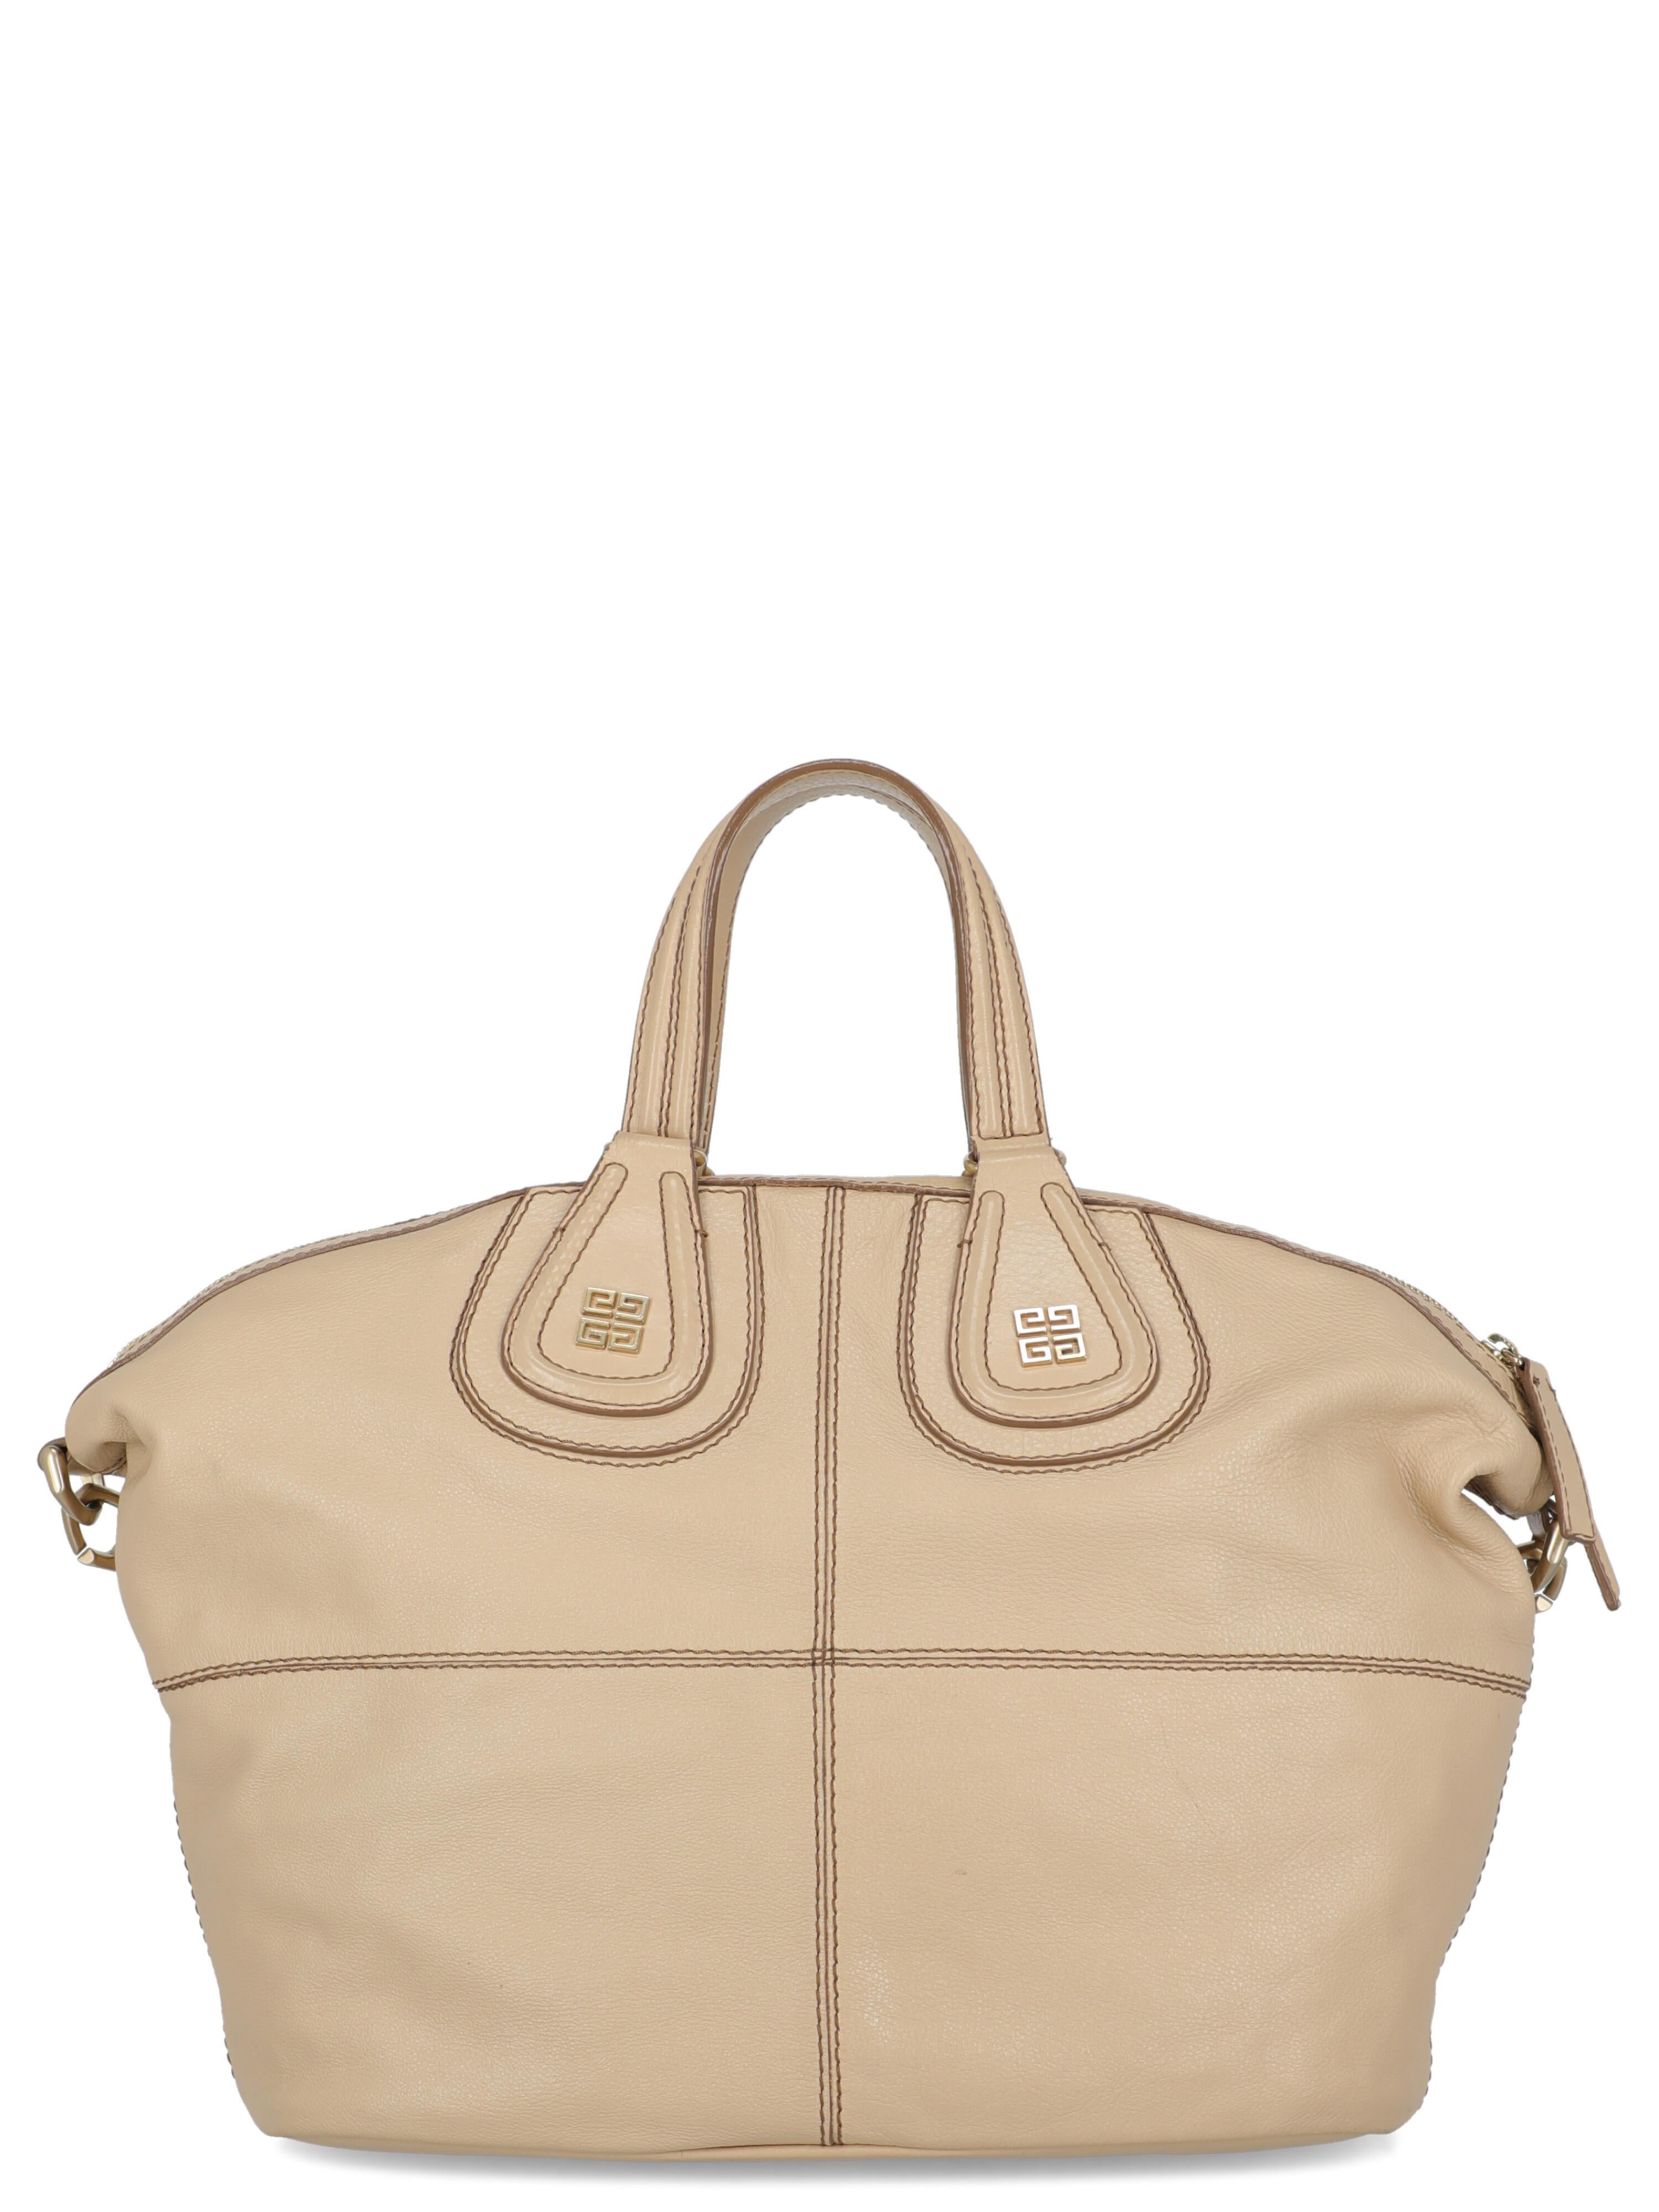 Givenchy Women  Handbags  Nightingale Beige Leather In Good Condition For Sale In Milan, IT